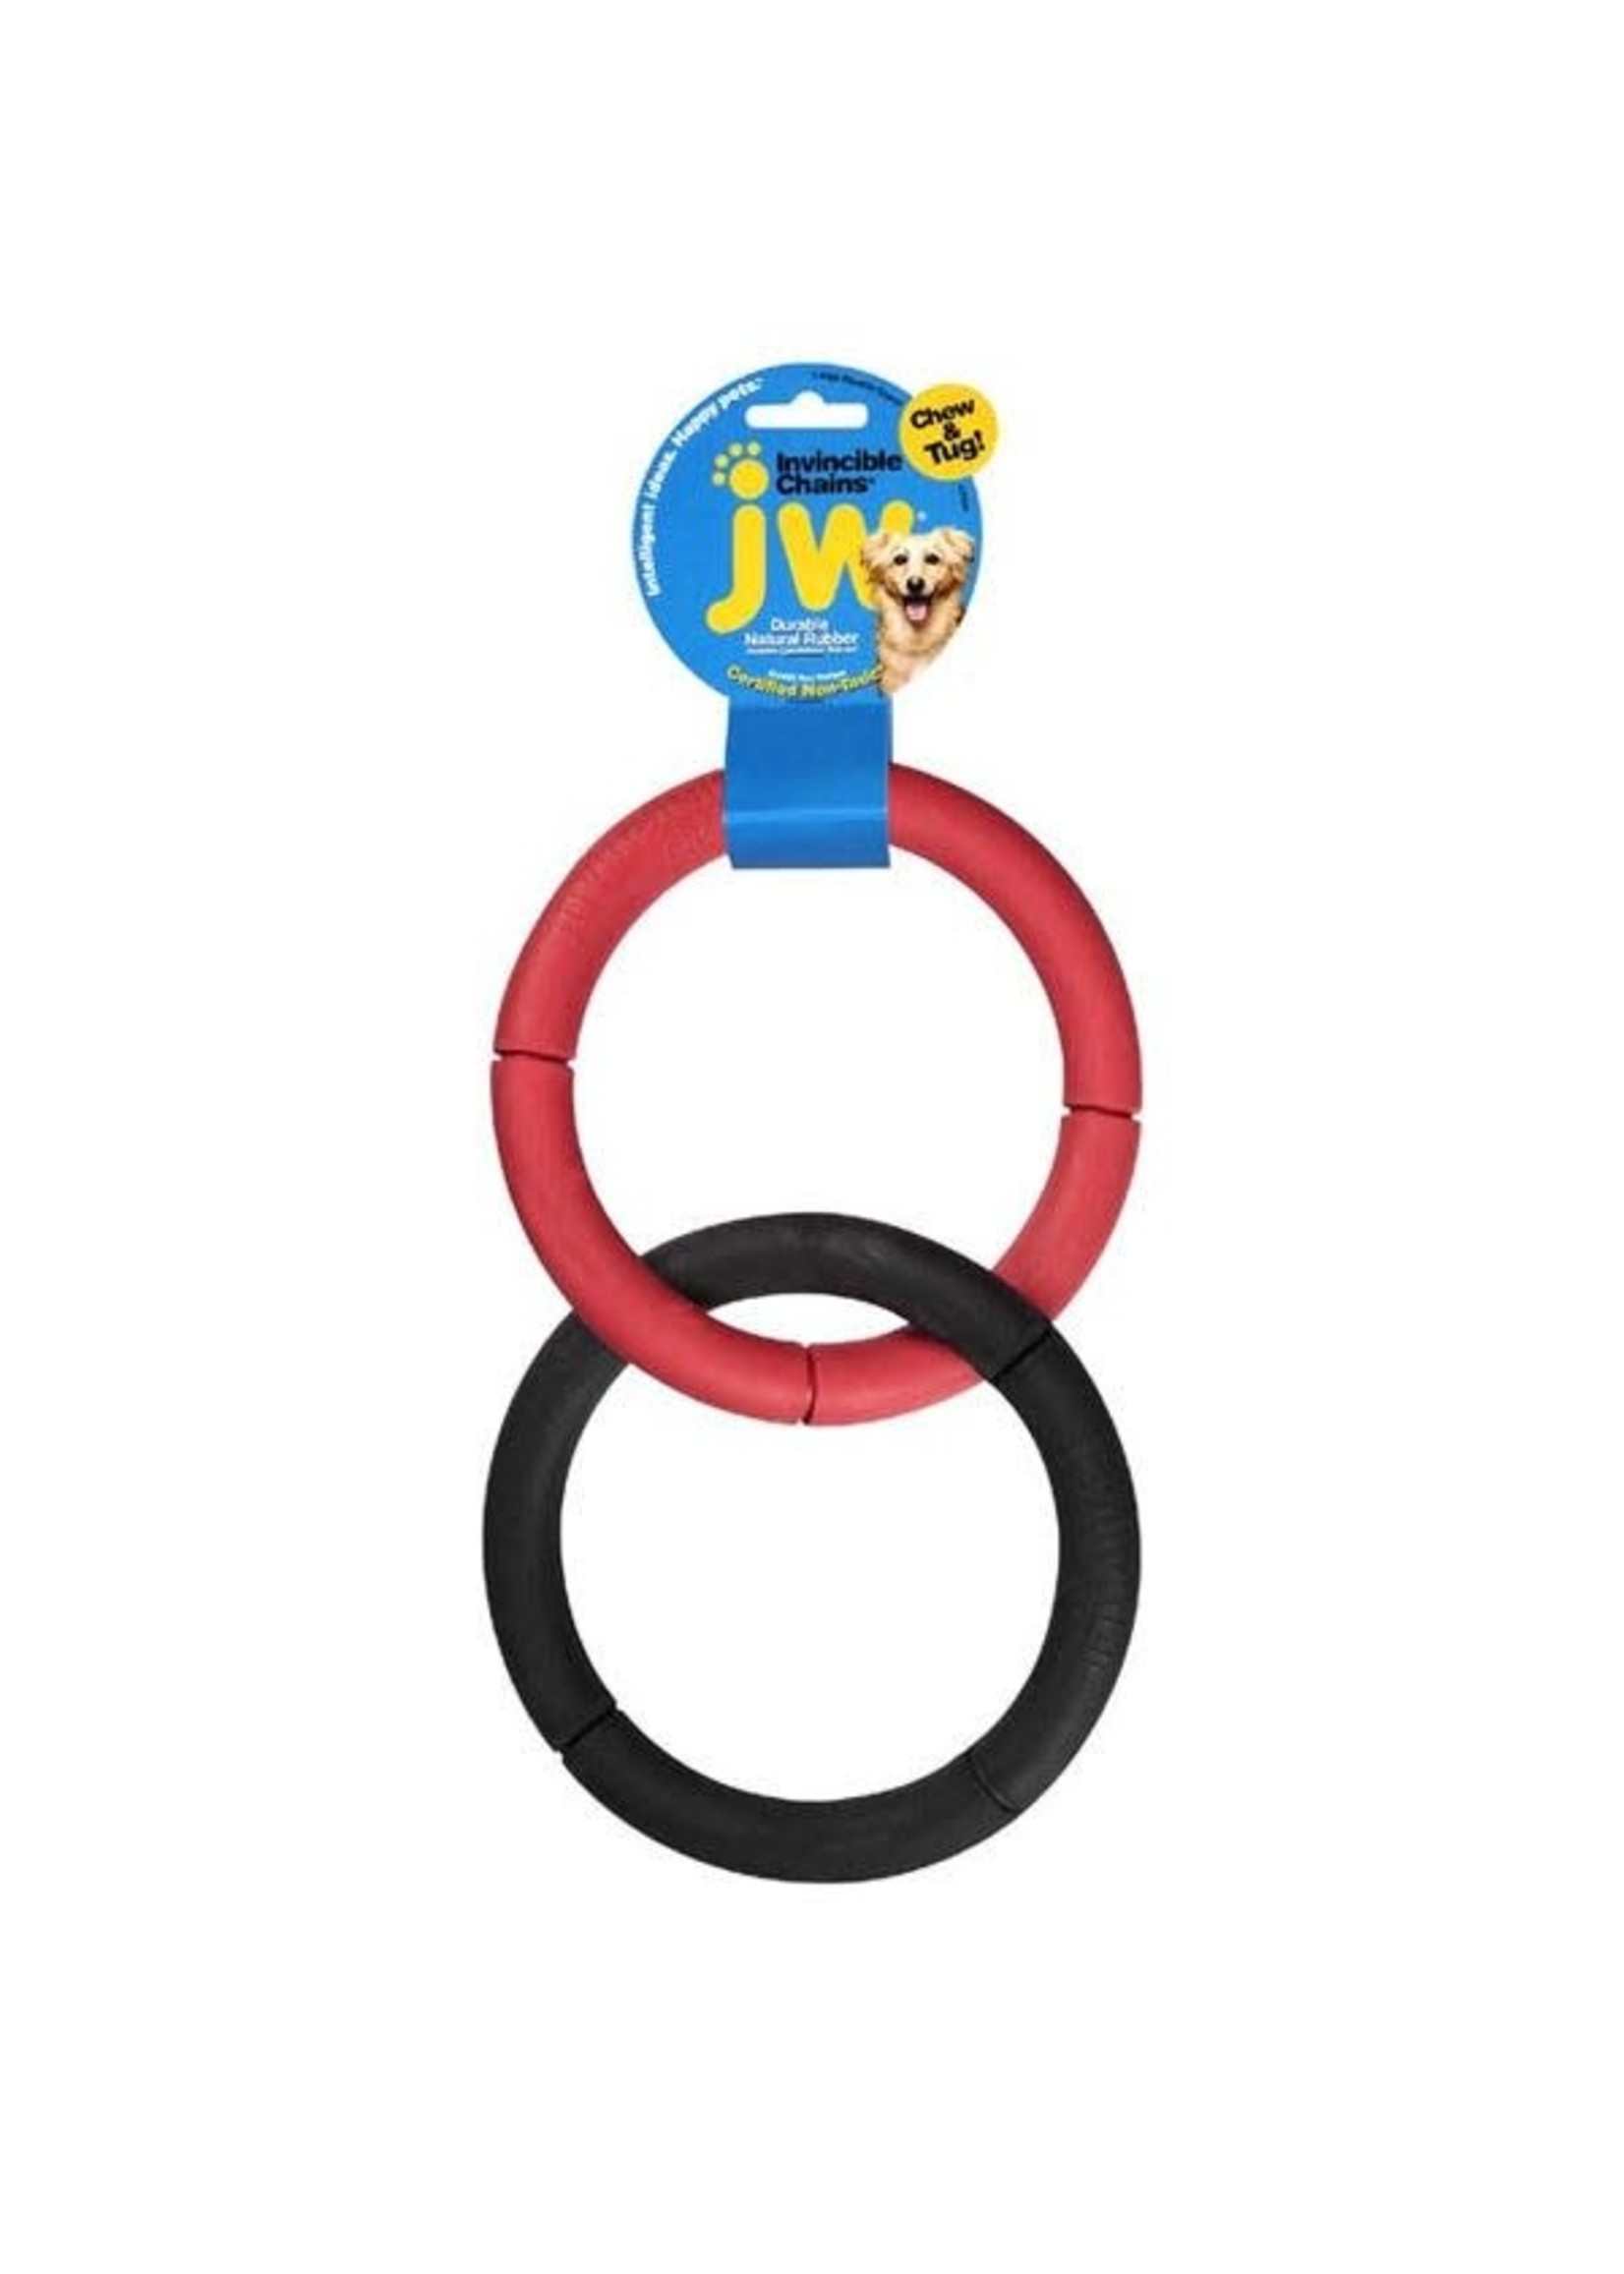 JW JW Invincible Chains Chew Toy Small Double